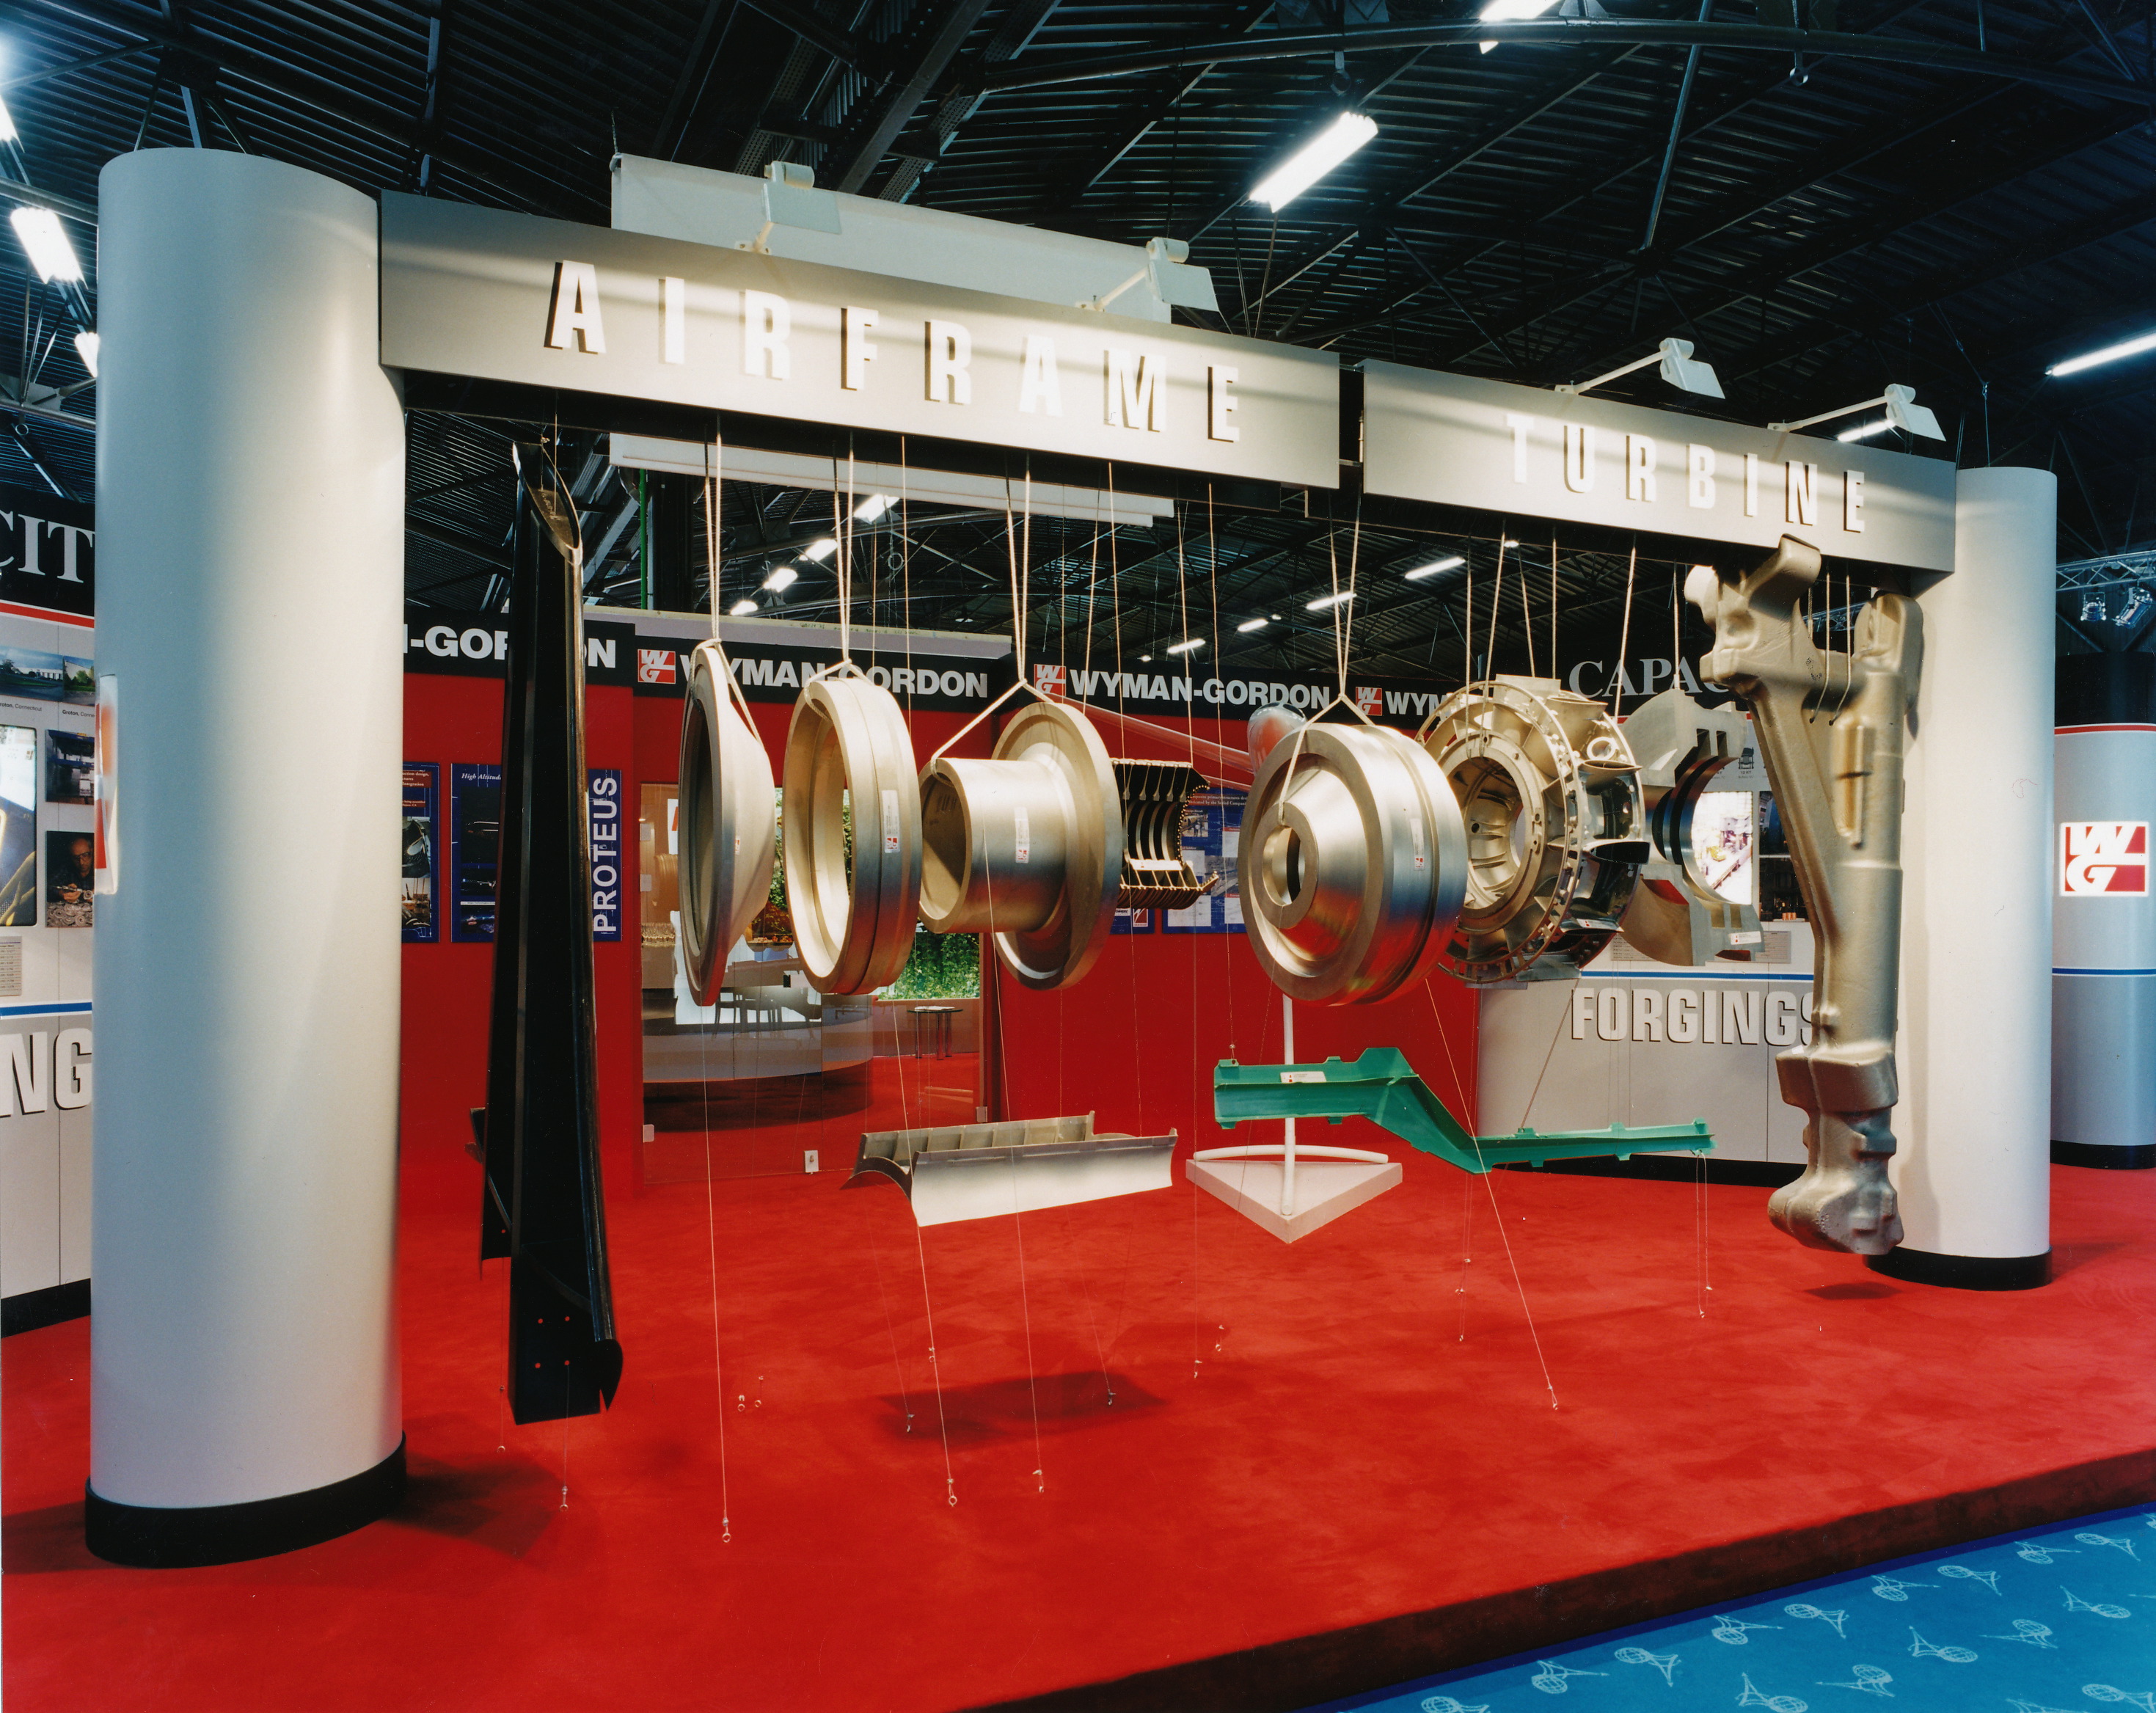 Hanging display of jet engine component parts hanging in an exploded view.